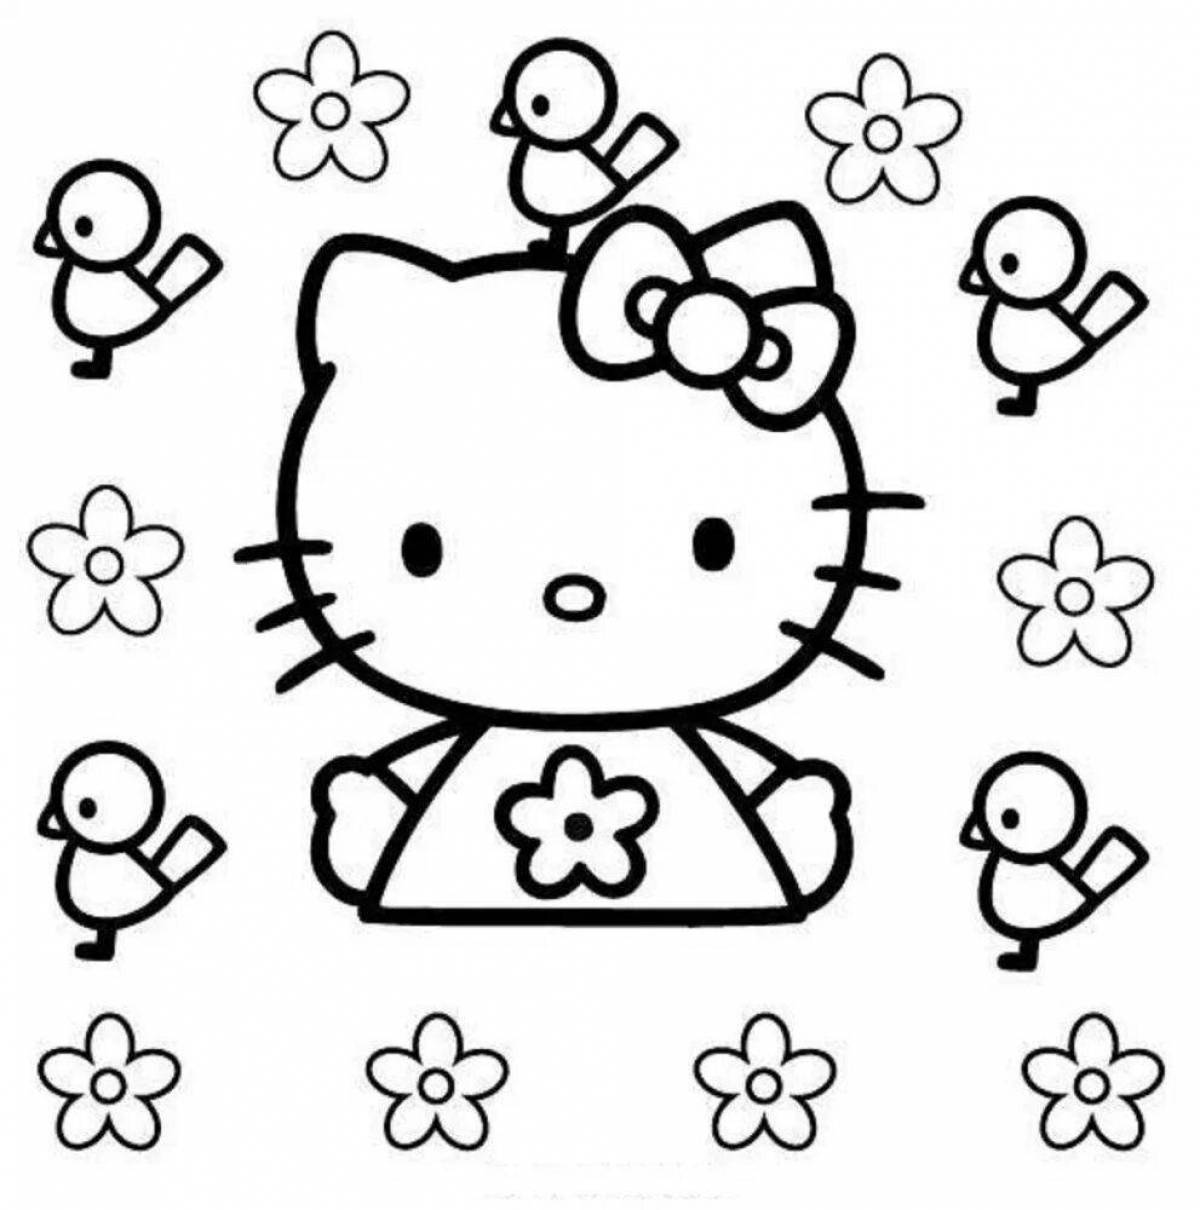 Awesome hello kitty coloring book